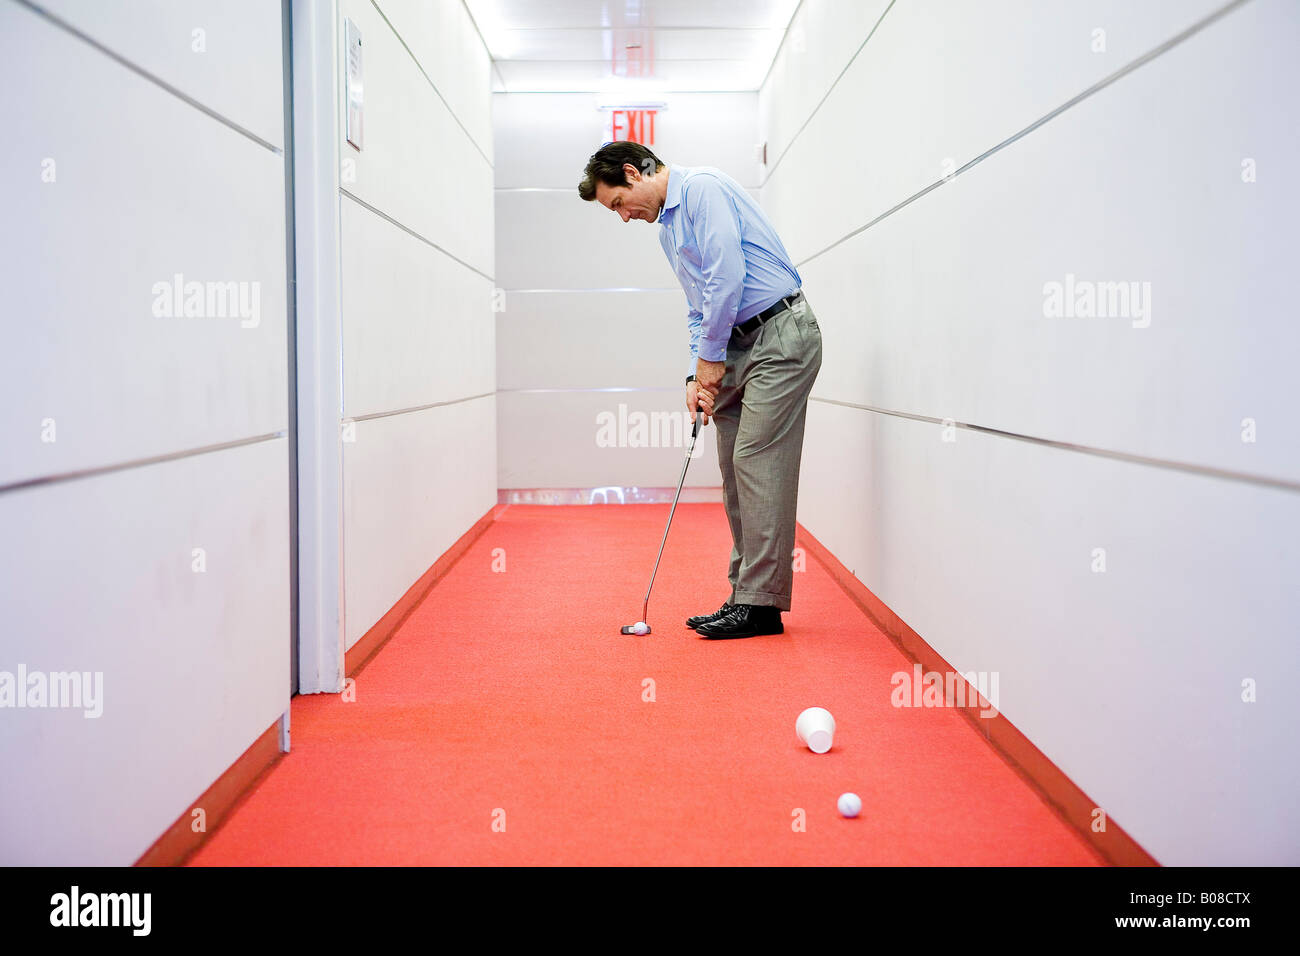 Businessman playing golf in office hallway Stock Photo